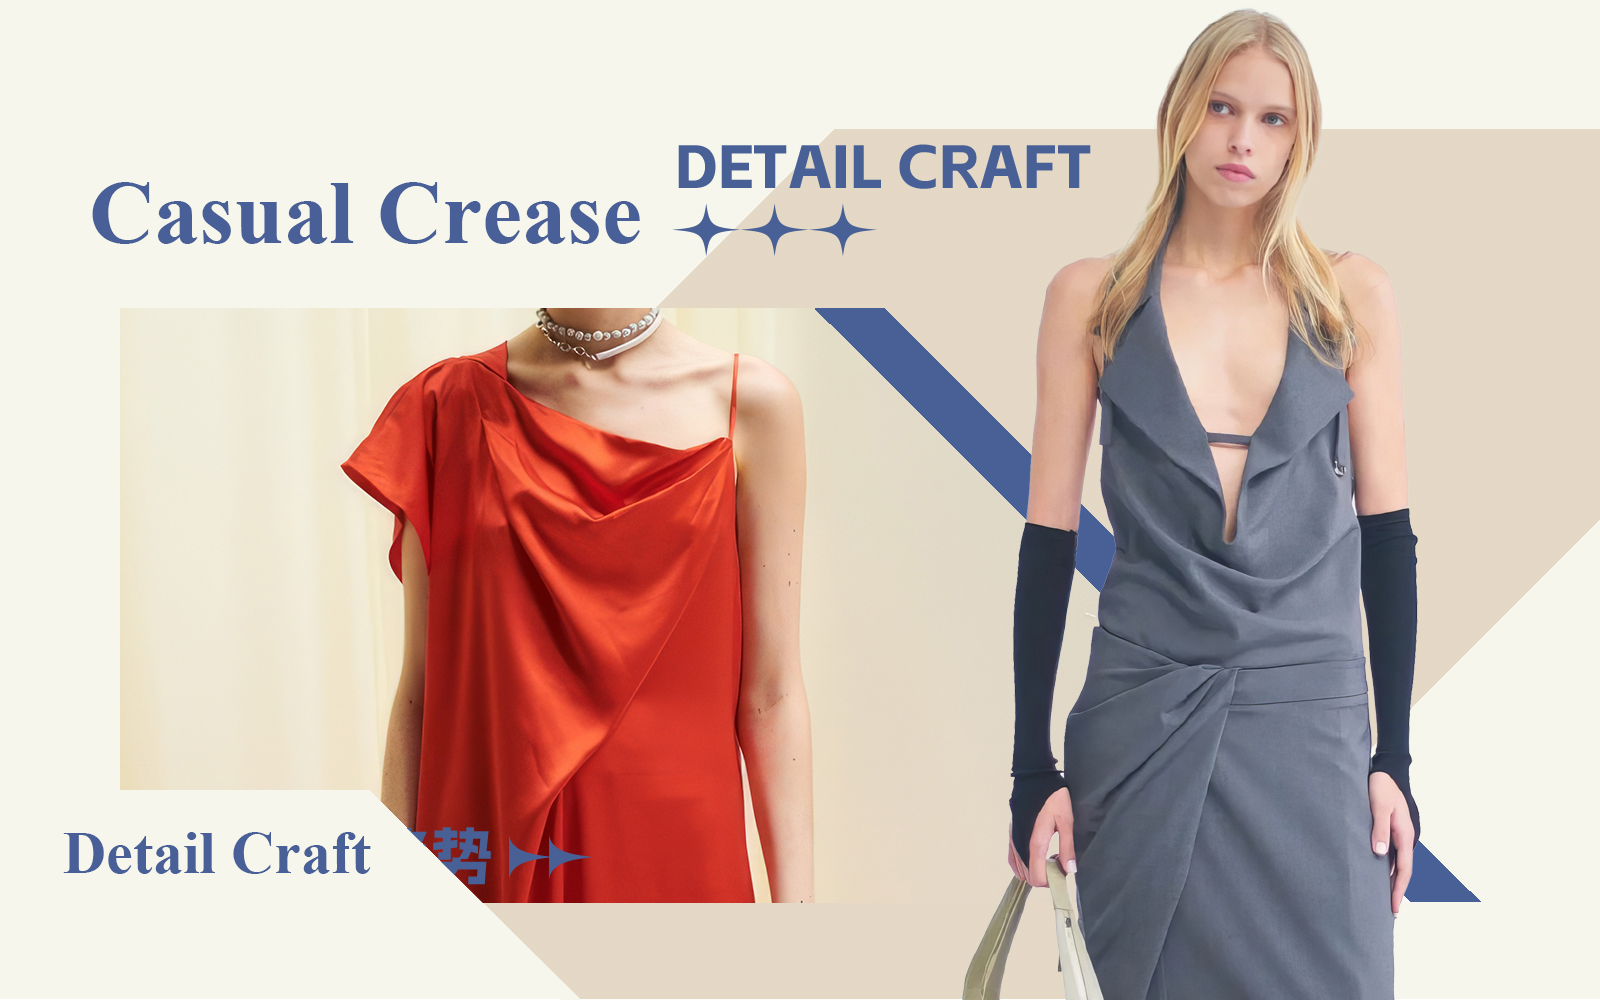 Casual Crease -- The Detail & Craft Trend for Womenswear